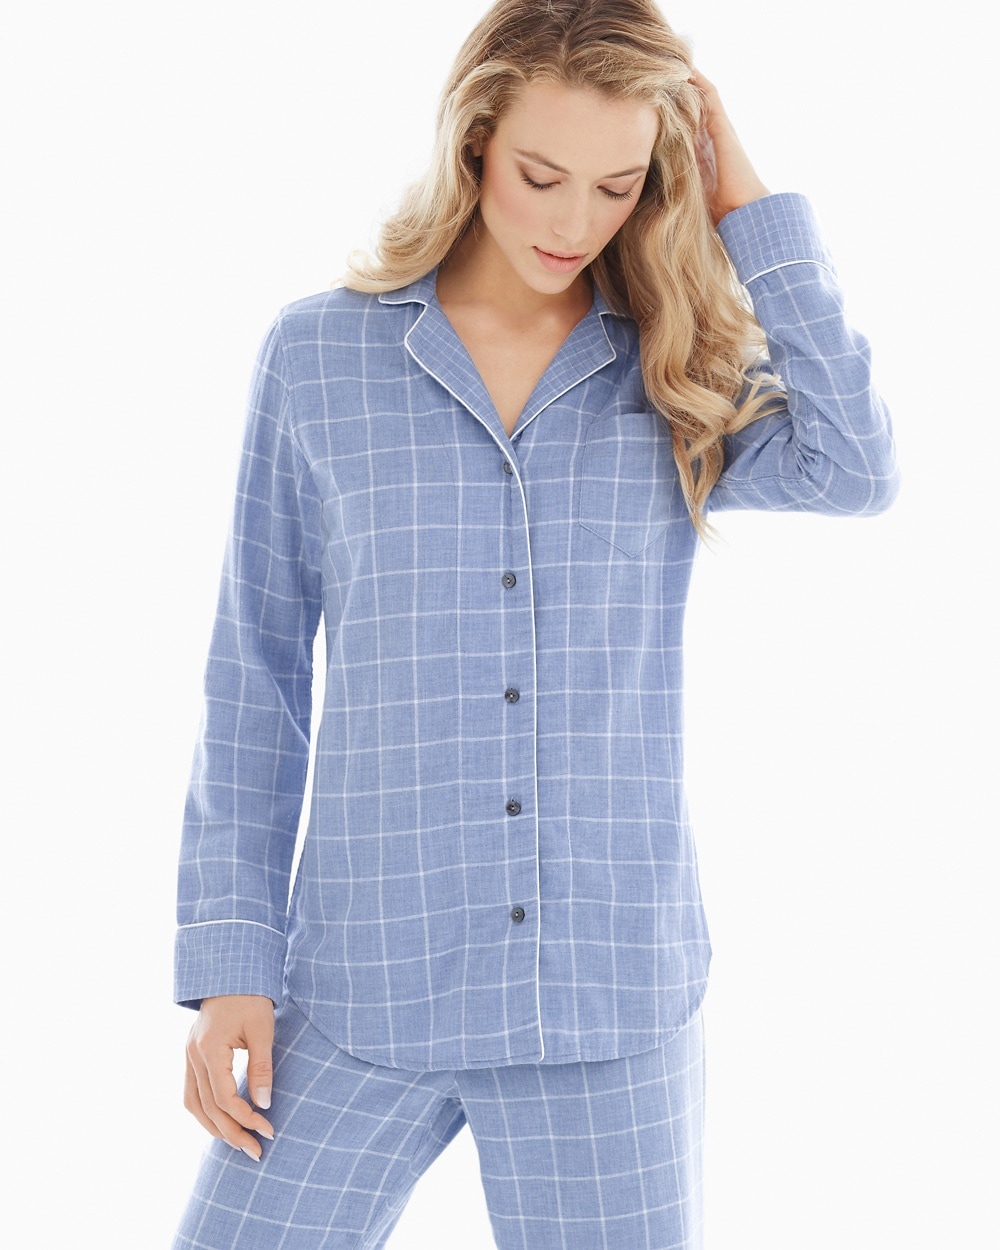 Naked Essential Long Sleeve Cotton Pajama Top Plaid Lavender